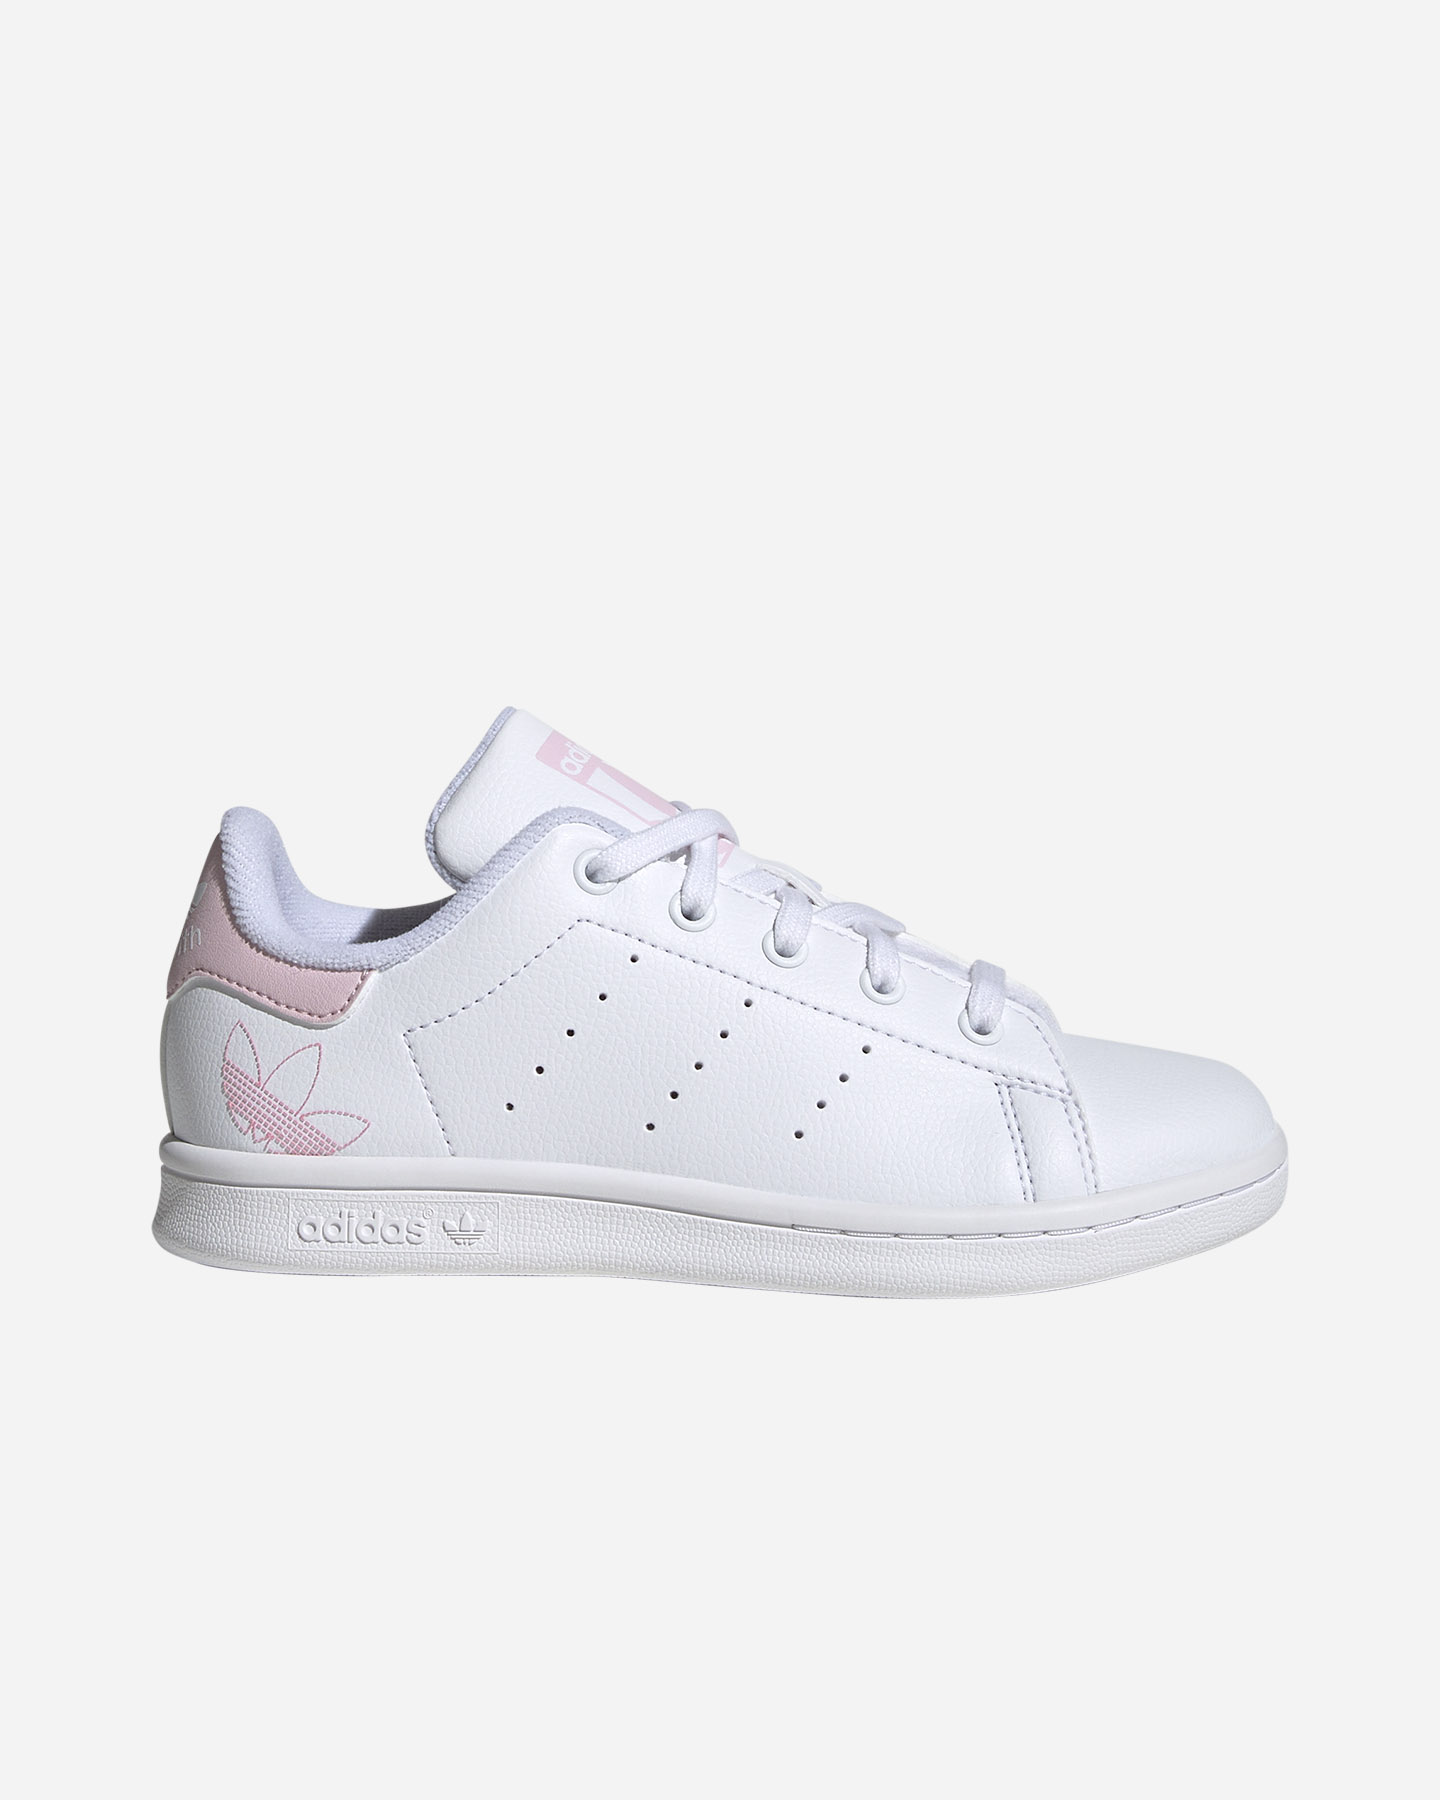 Image of Adidas Stan Smith Ps Jr - Scarpe Sneakers